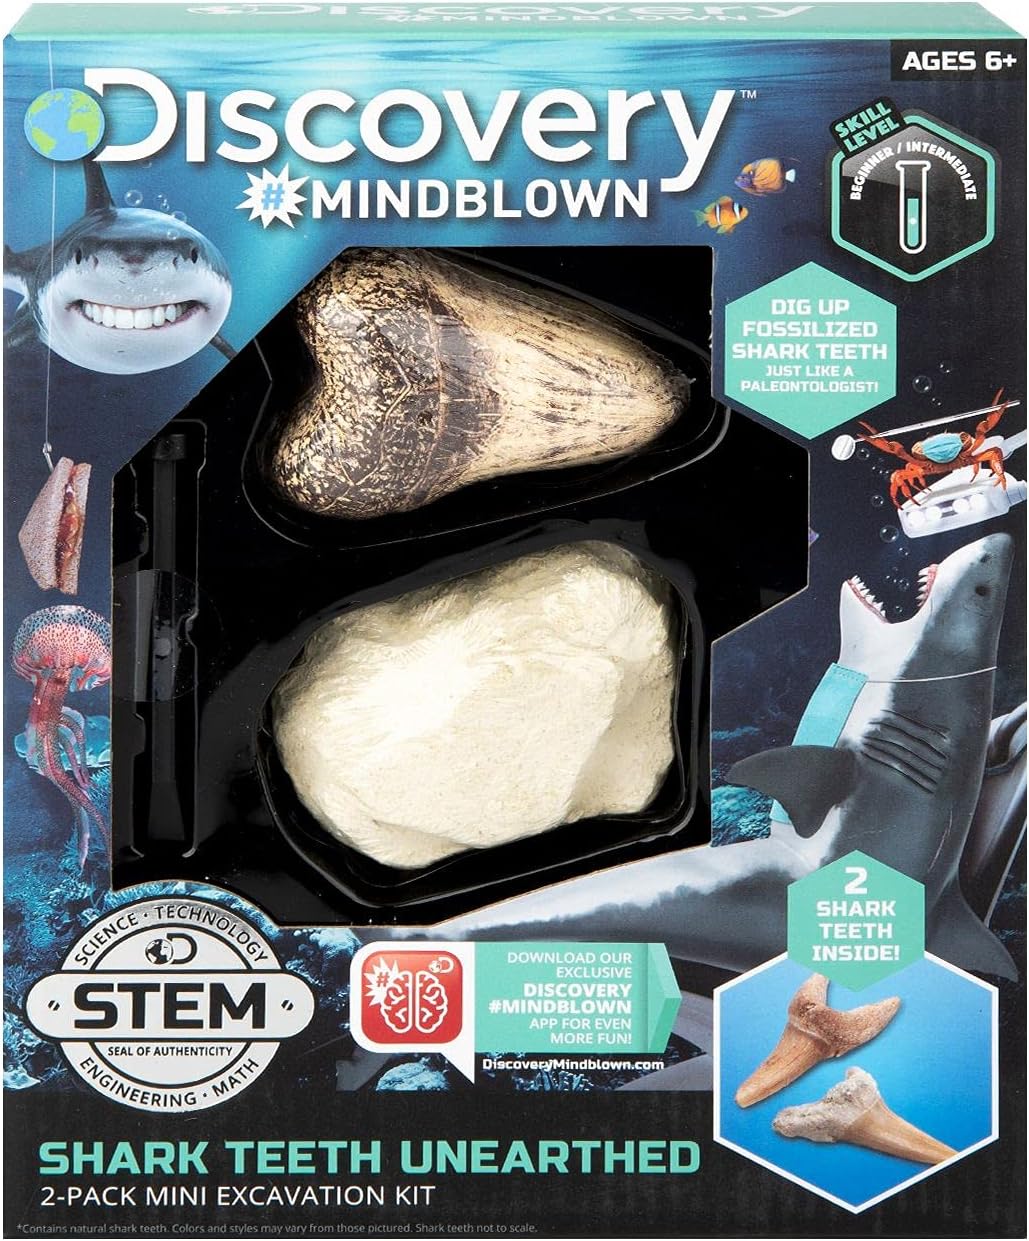 DISCOVERY MINDBLOWN 2-PACK MINI EXCAVATION KIT - SHARK TEETH UNEARTHED